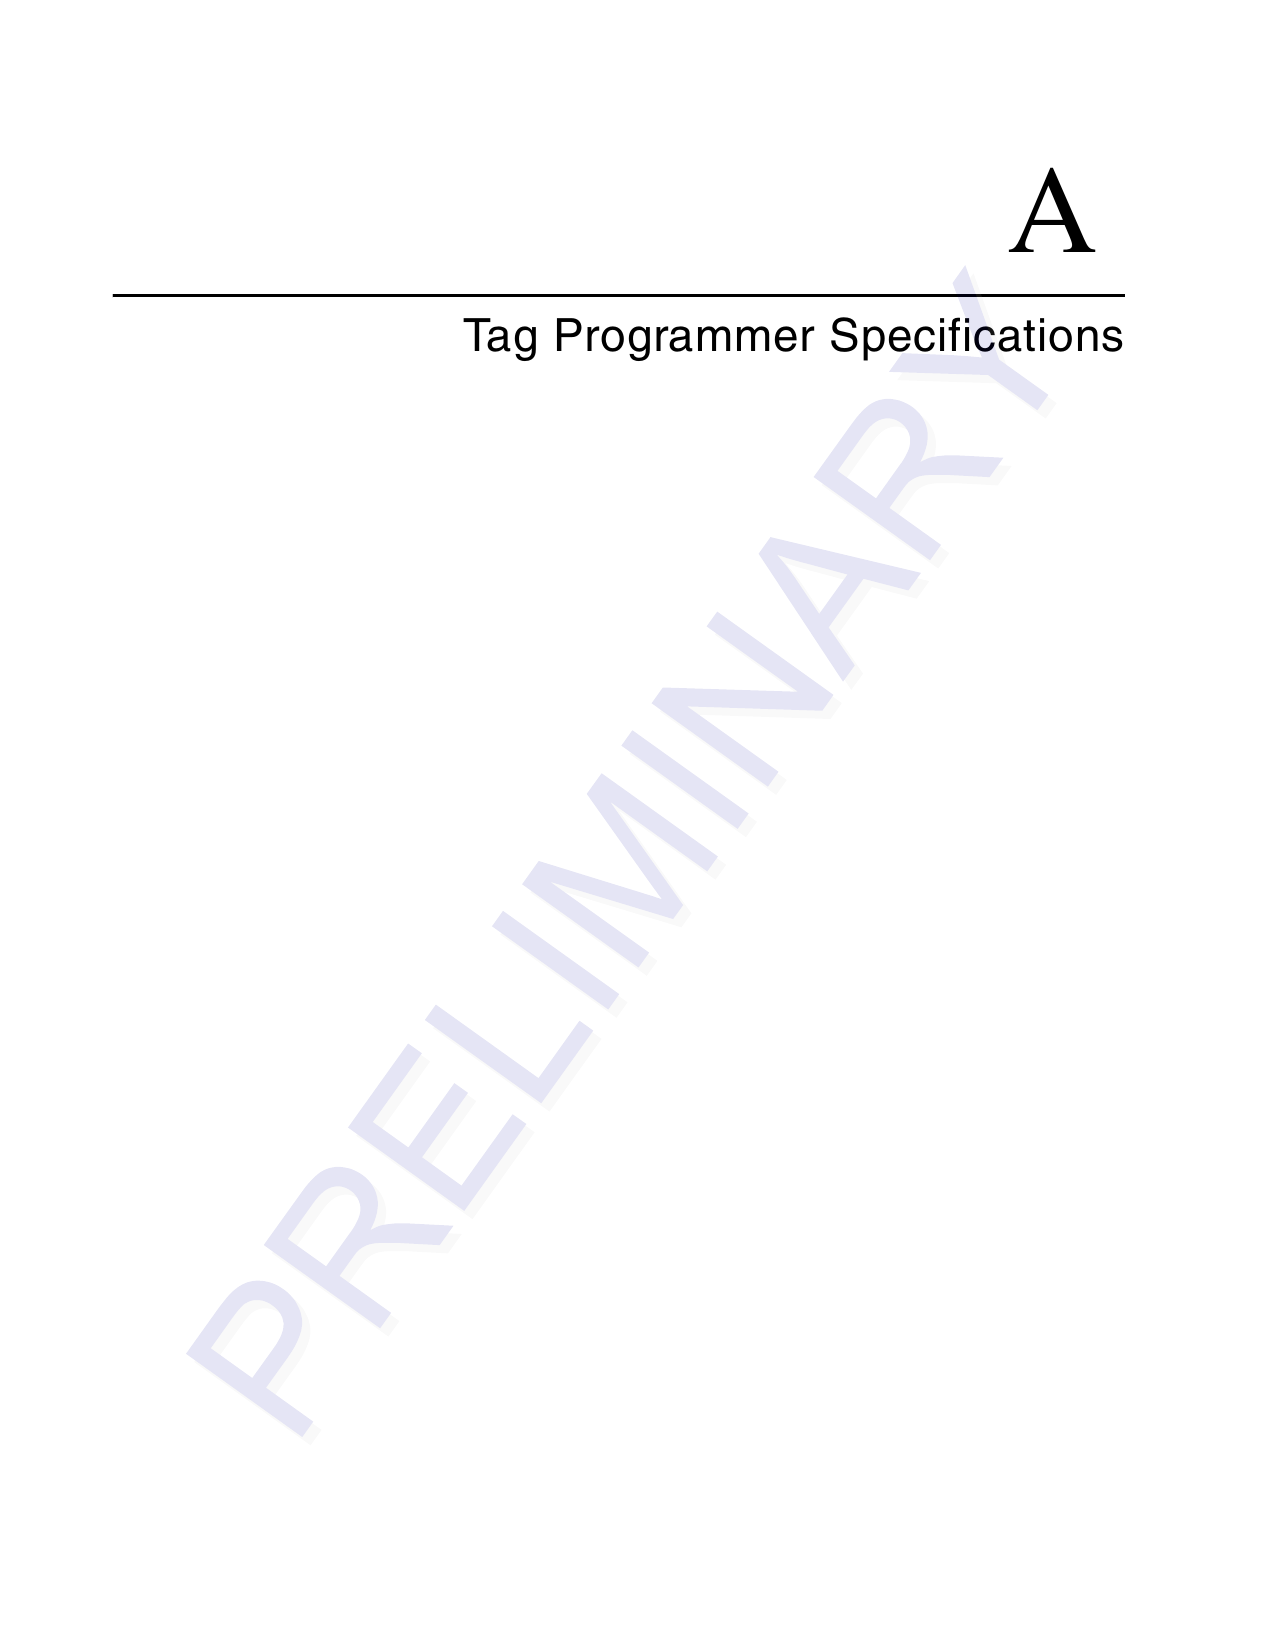 ATag Programmer Specifications